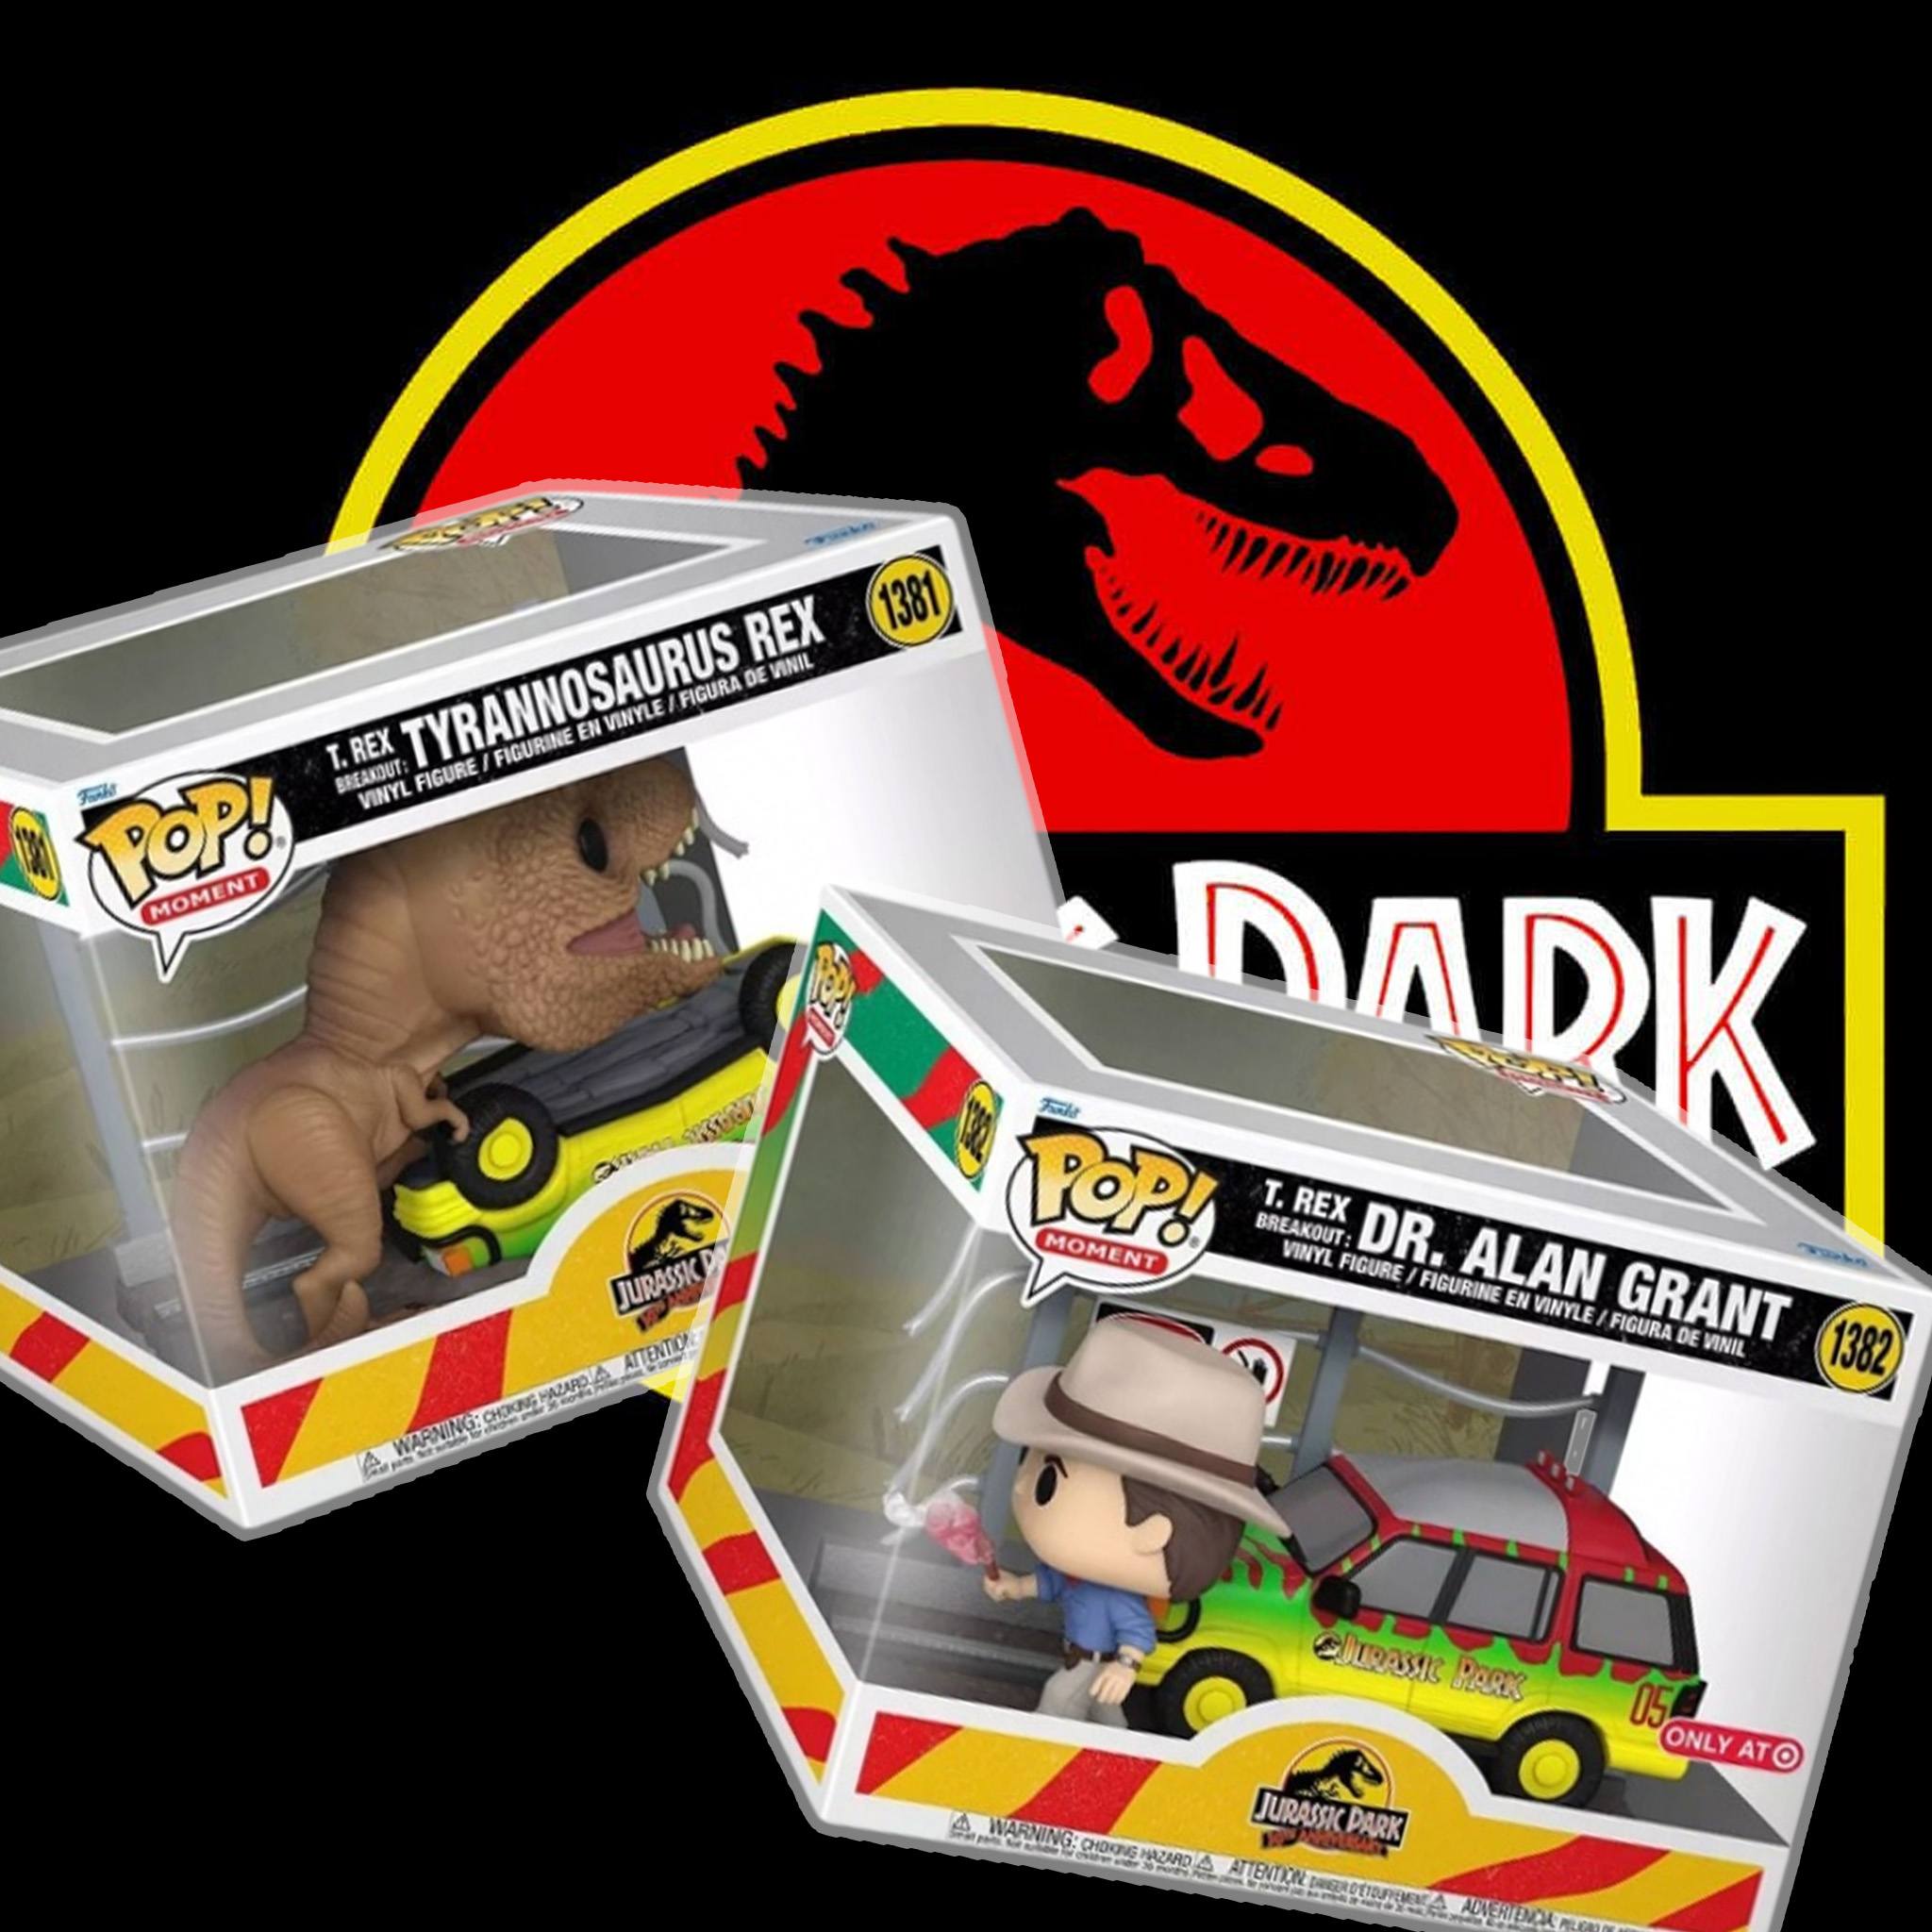 Two exceptional new Jurassic Park Funko POP Moments